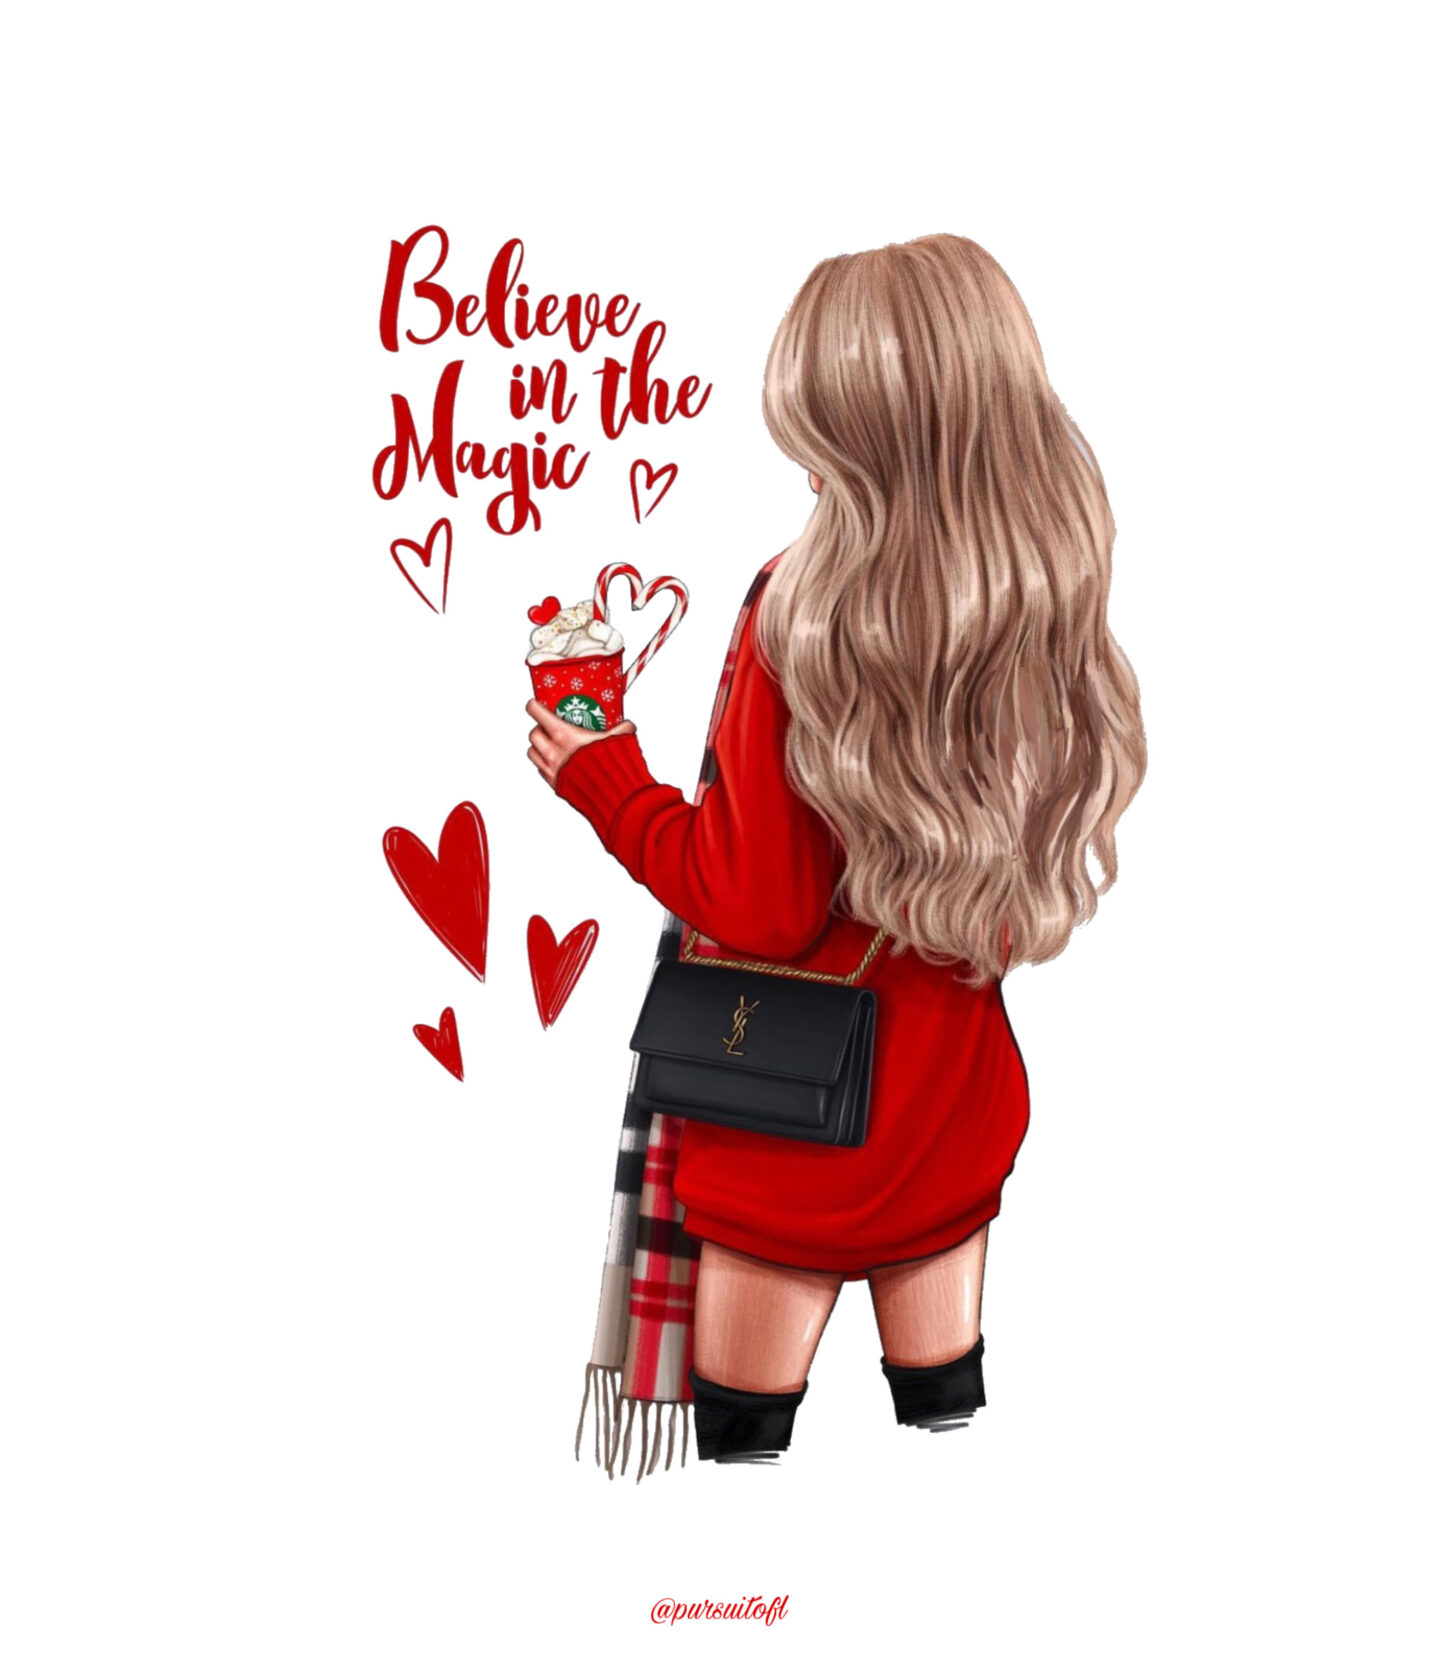 White holiday tablet wallpaper with lady wearing red sweater dress, plaid scarf, black bag, and black boots, holding a Starbucks red cup drink, red believe in the magic text, and red hearts